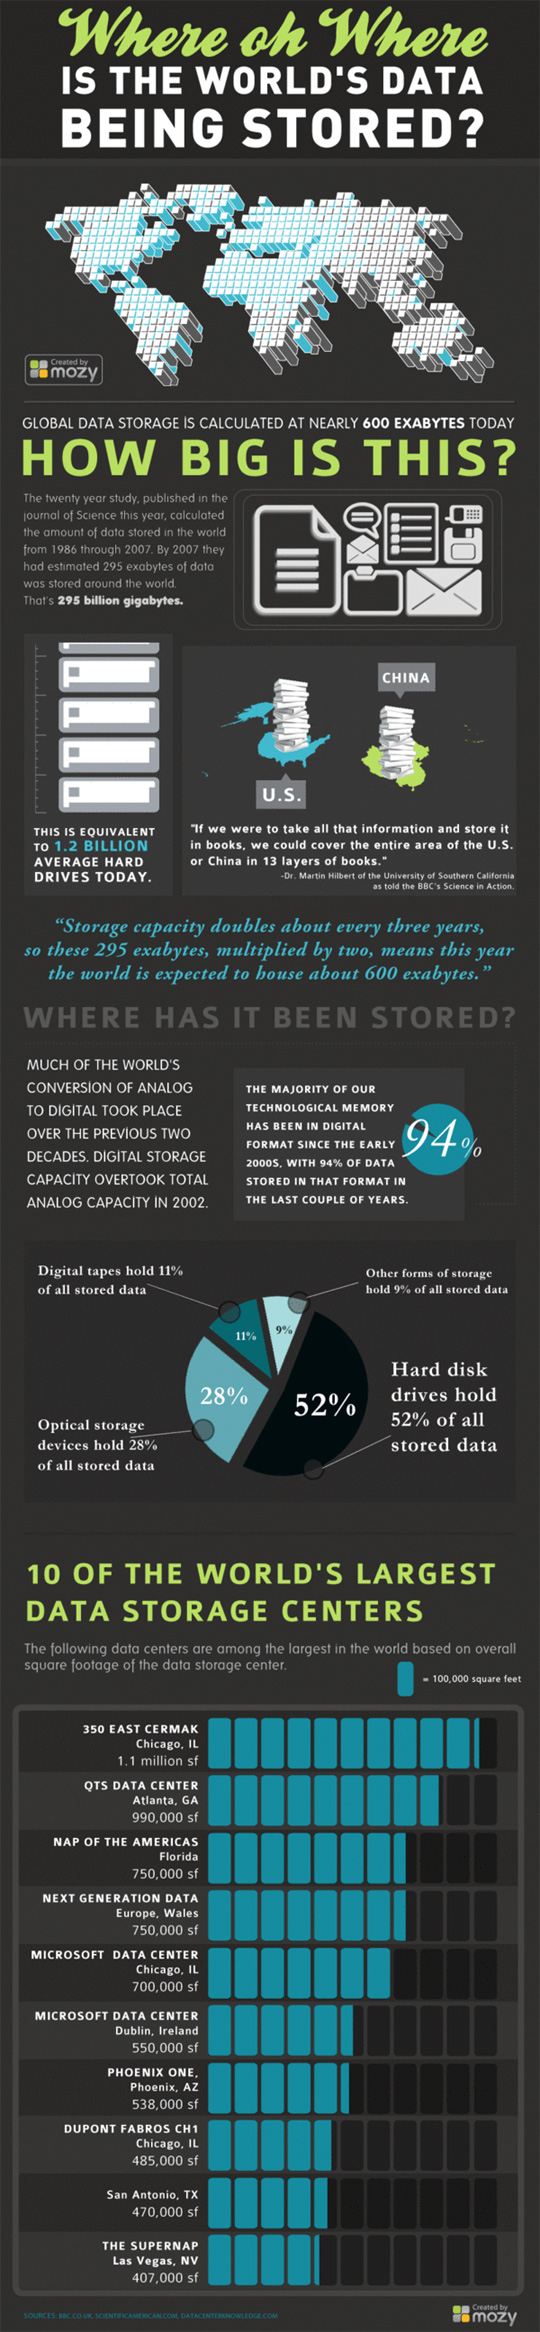 Where Oh Where: Current State Of World's Data Storage (Infographic) 2